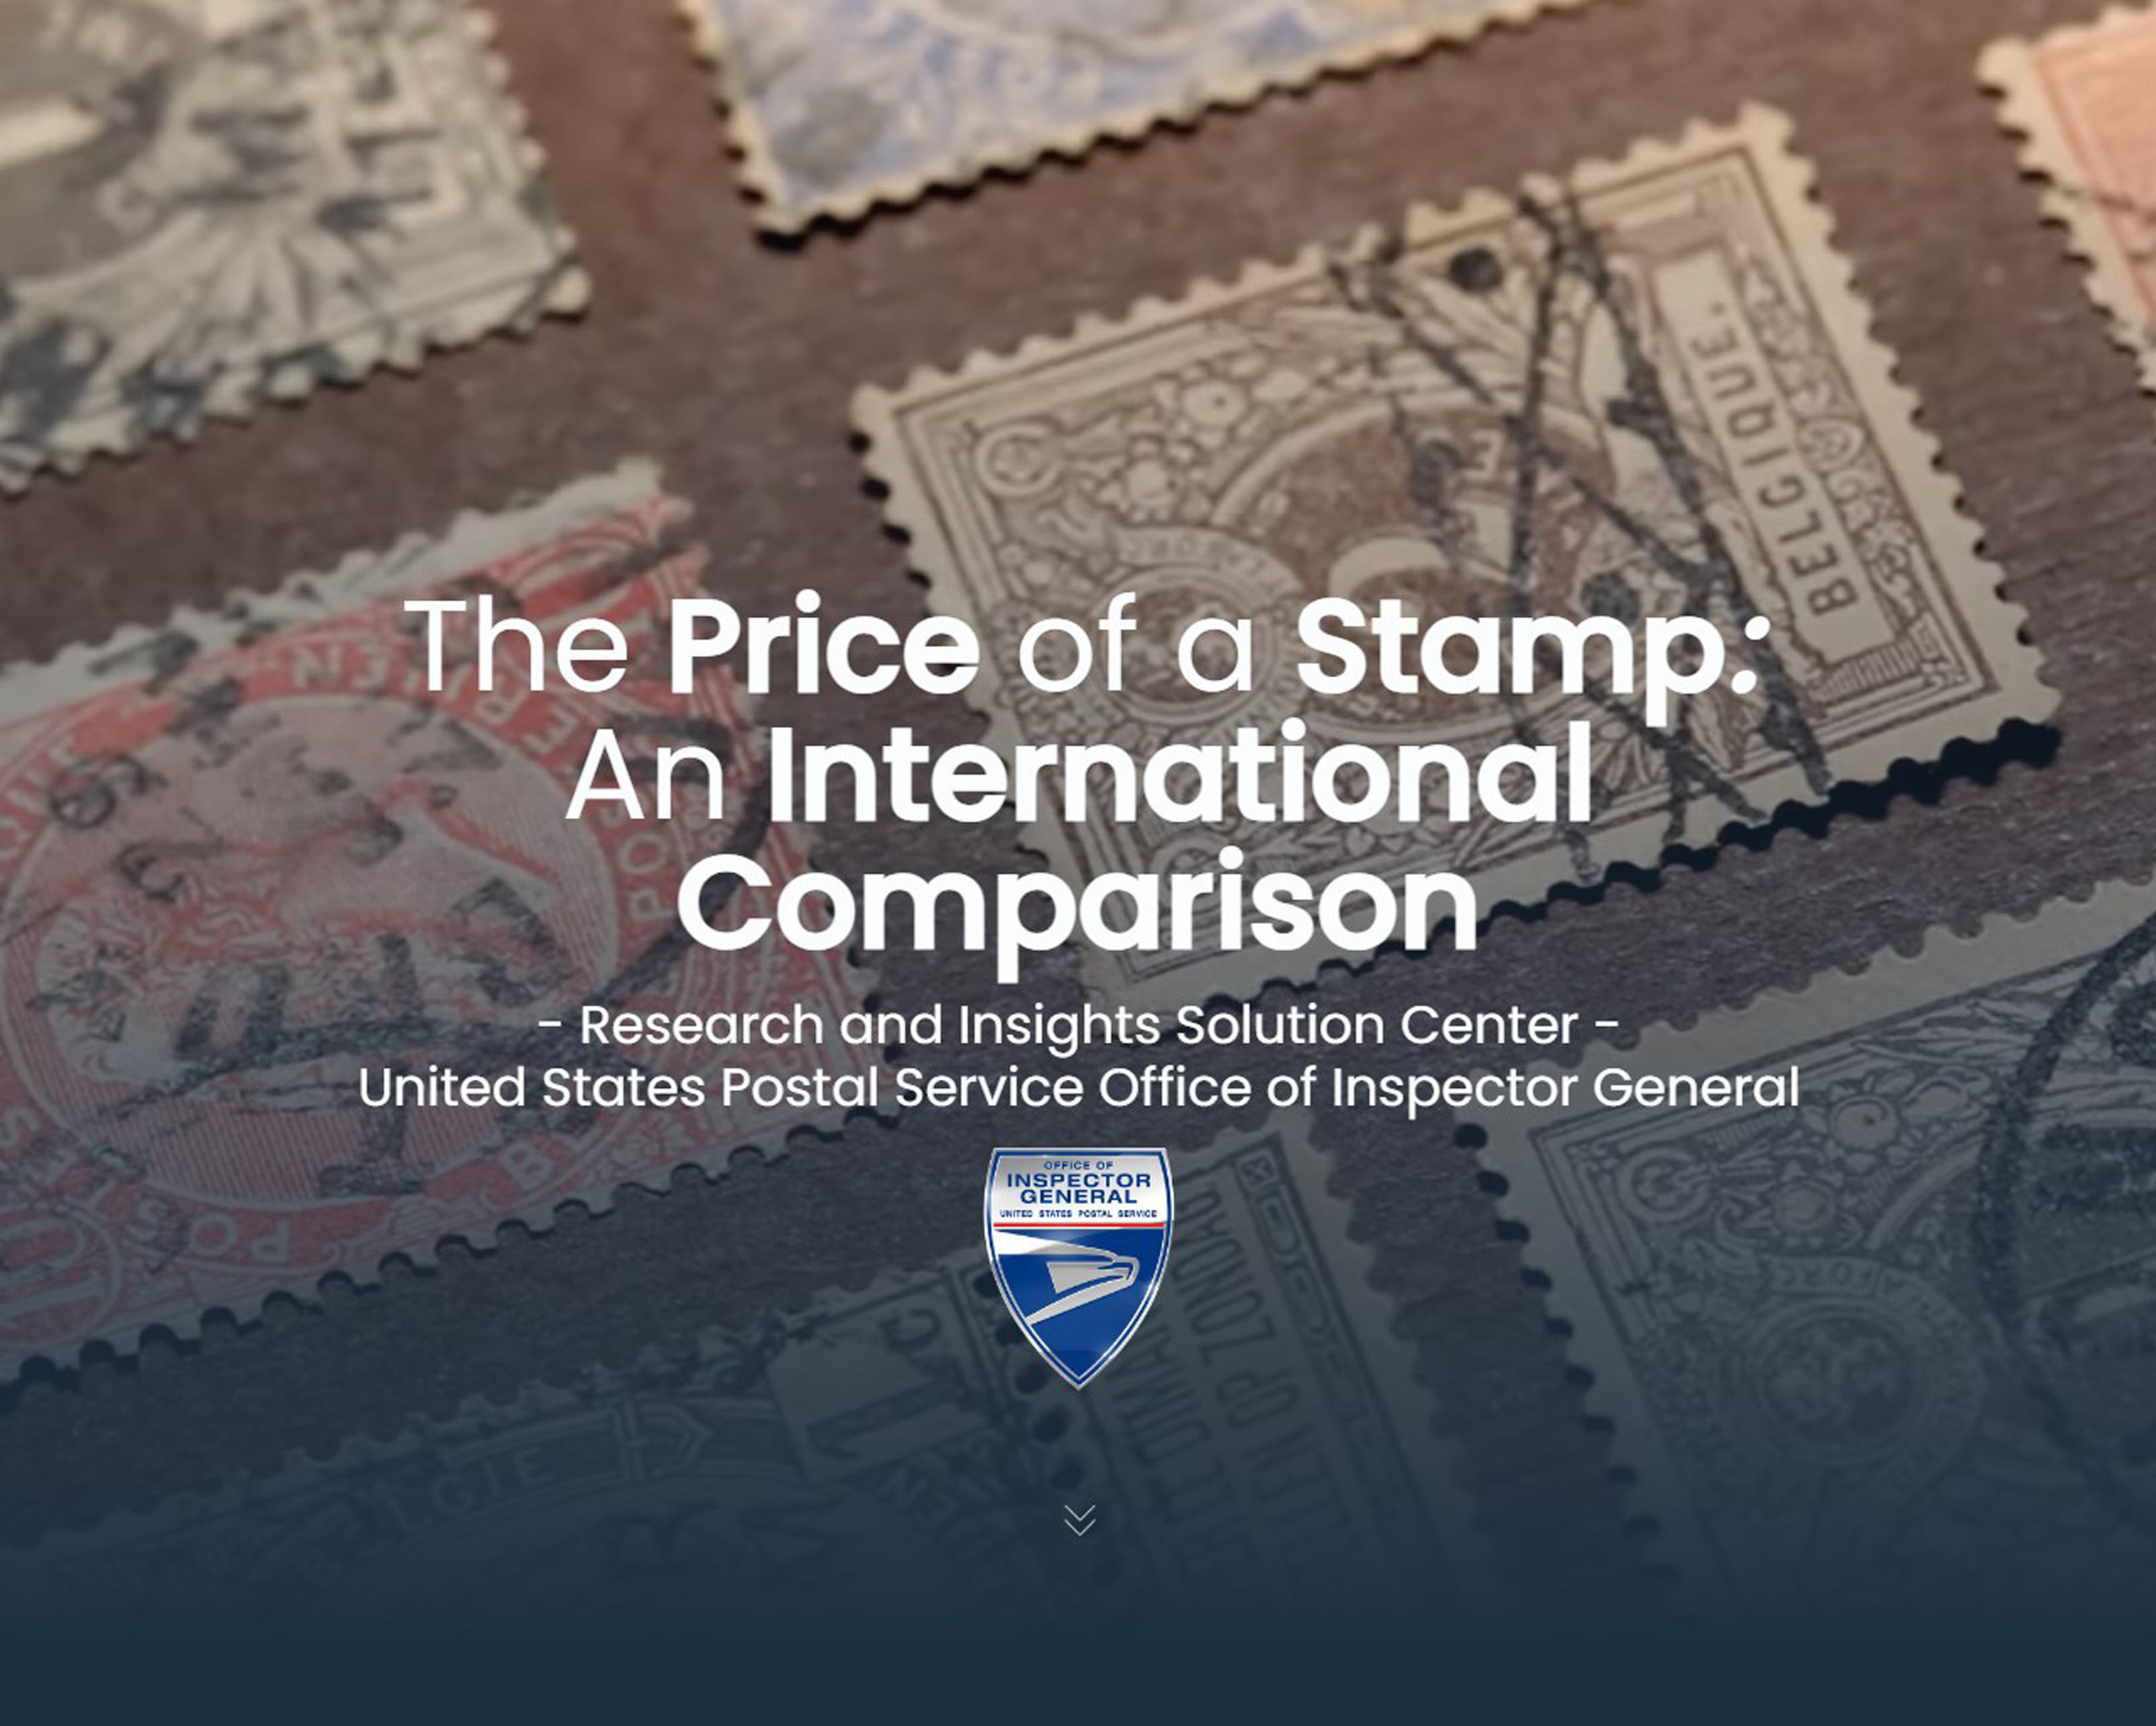 Price of A Stamp Story